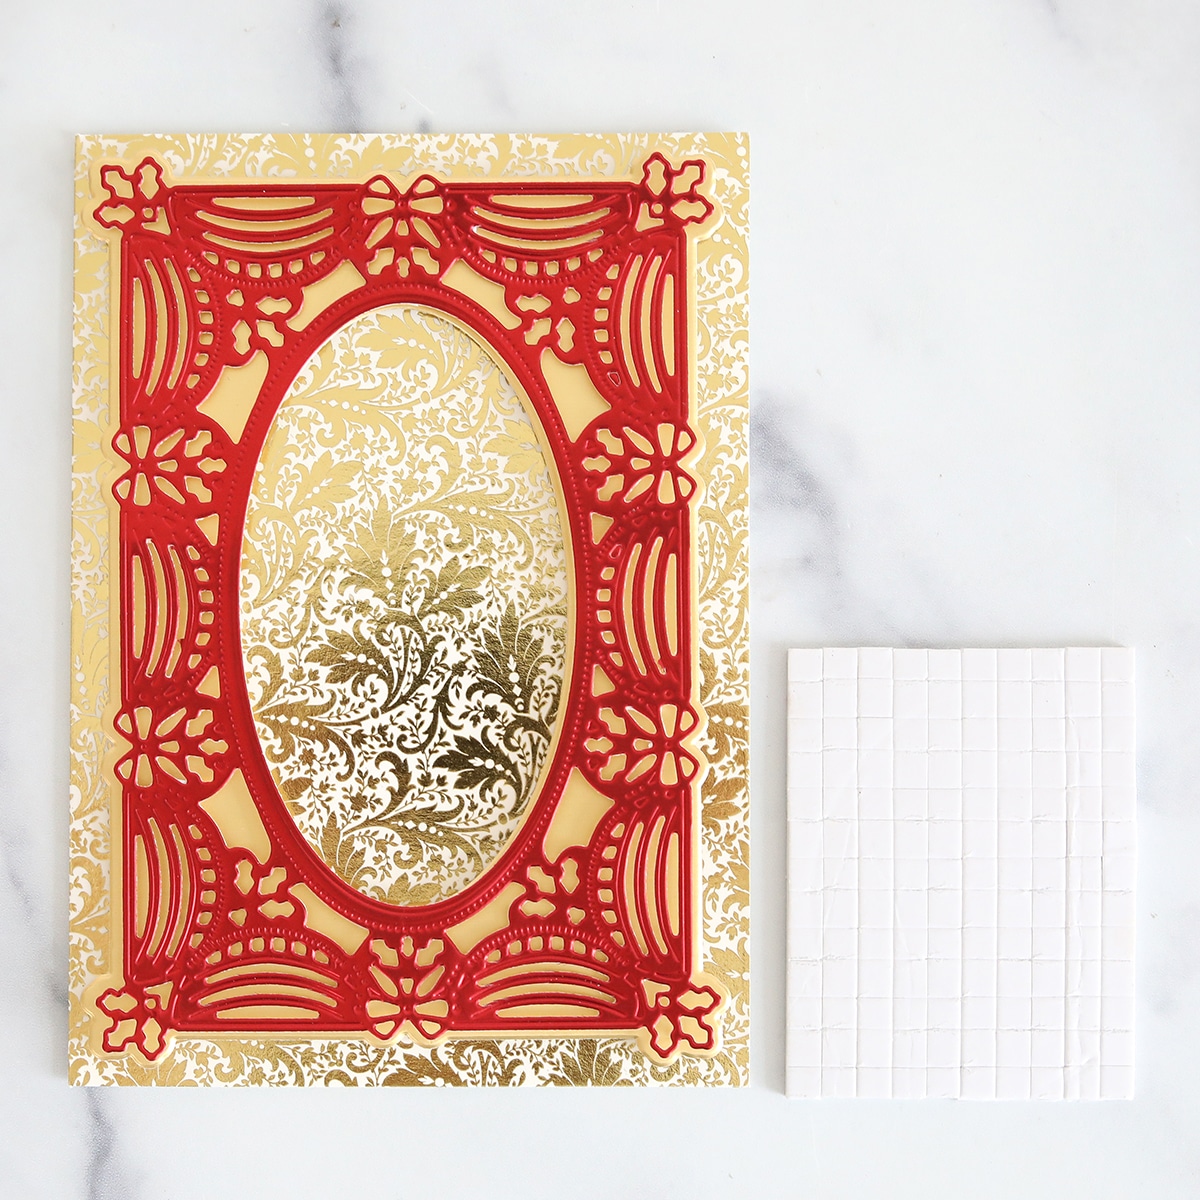 A card with a red and gold frame and a piece of paper.